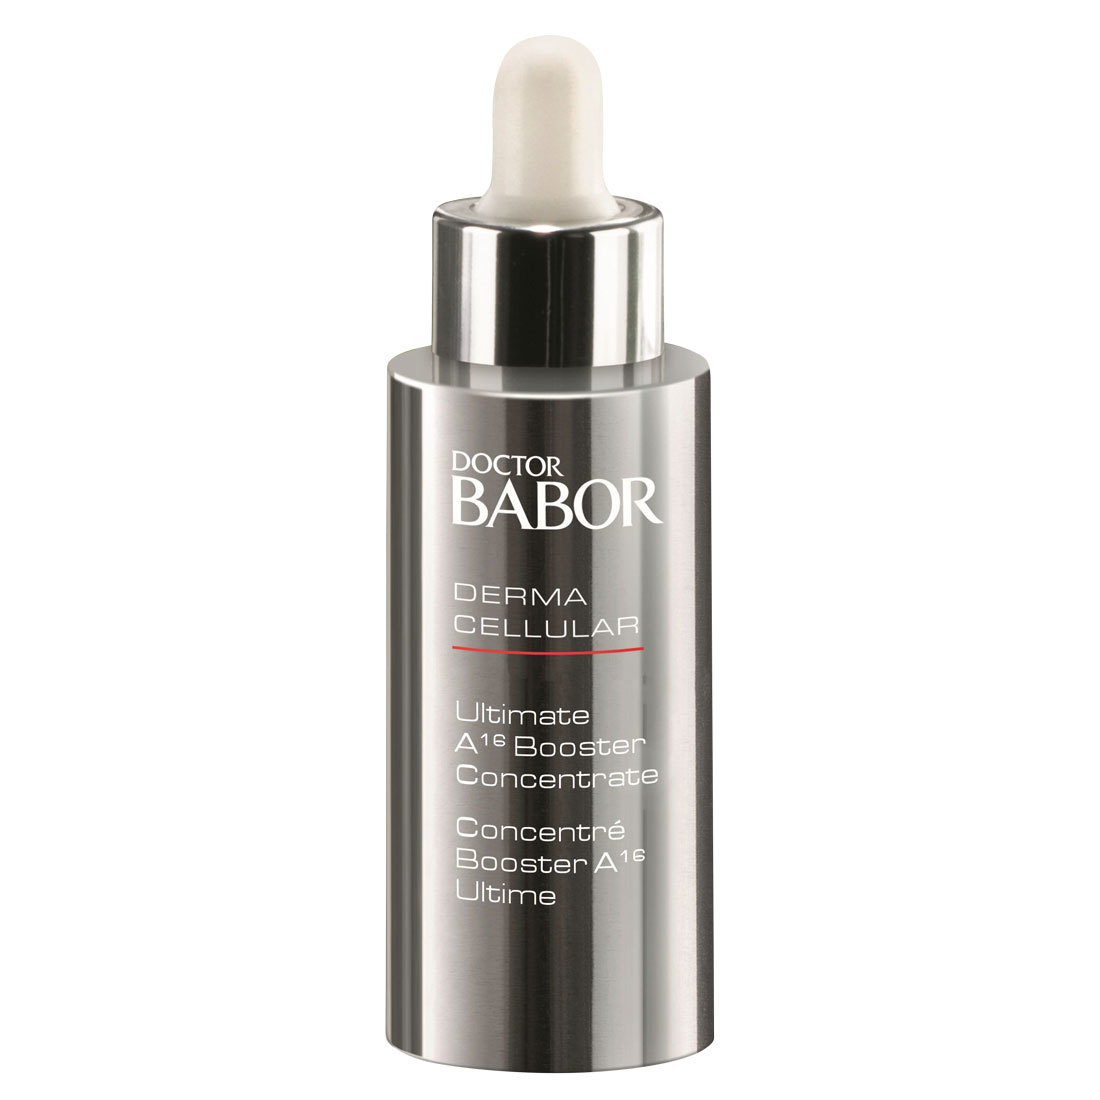 Концентрат Doctor Babor Refine Cellular A16 Booster Concentrate 30ml